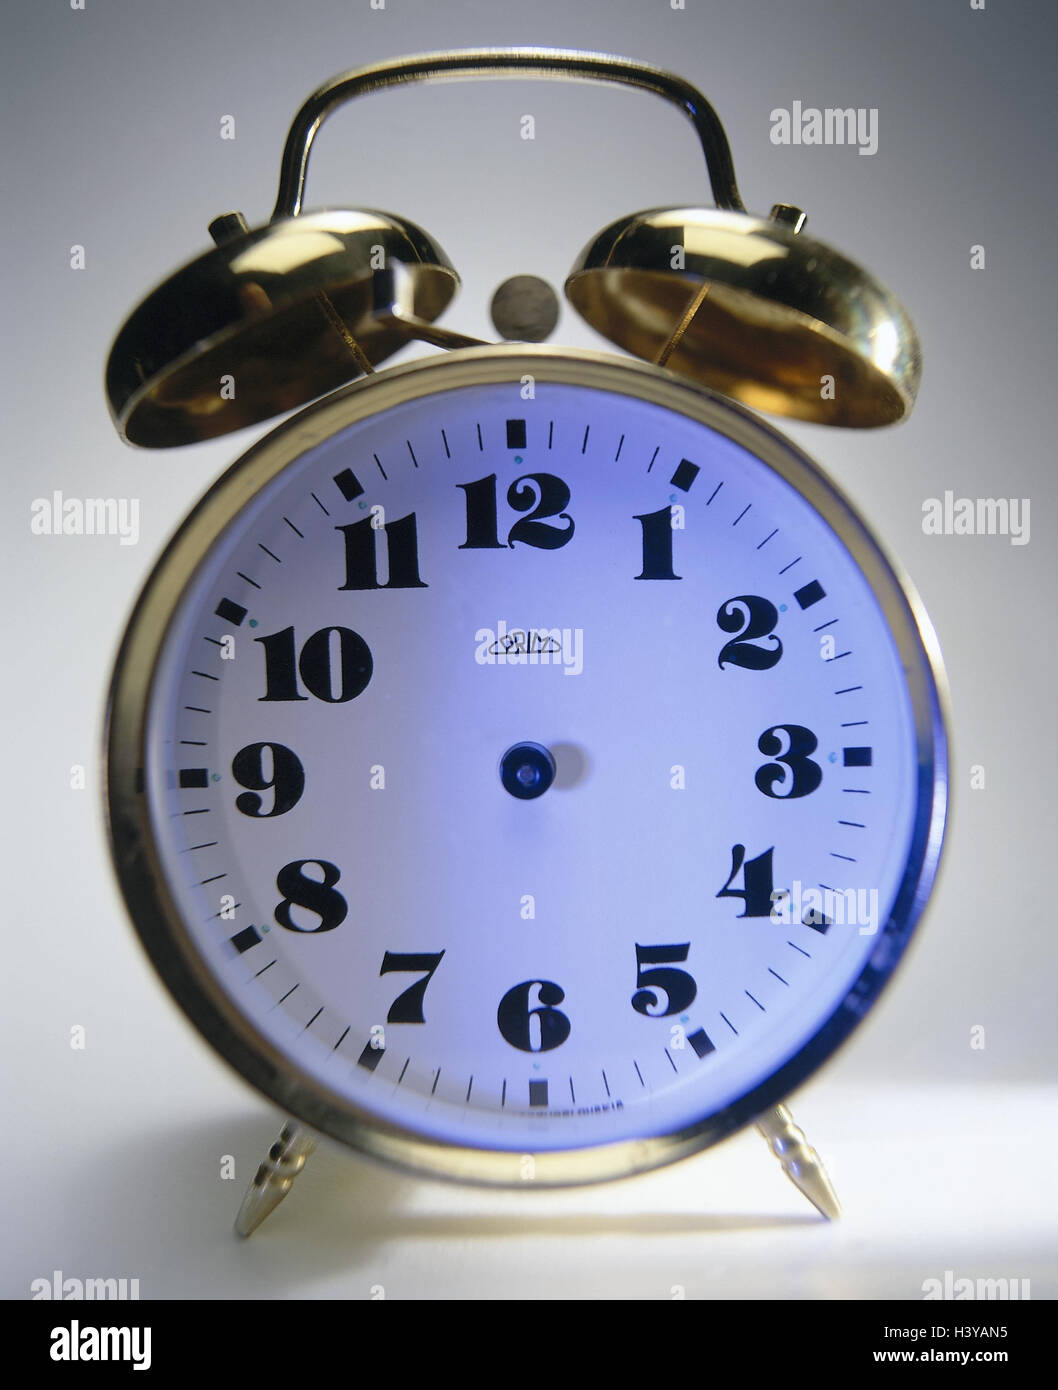 Alarm clocks, pointers, absent, icon, timeless, Still life, product photography, studio, clock, mechanically, mechanics, time, unendingly, Zeitlosigkeit, endlessly, forever, eternity, immortality, unvergänlich Stock Photo